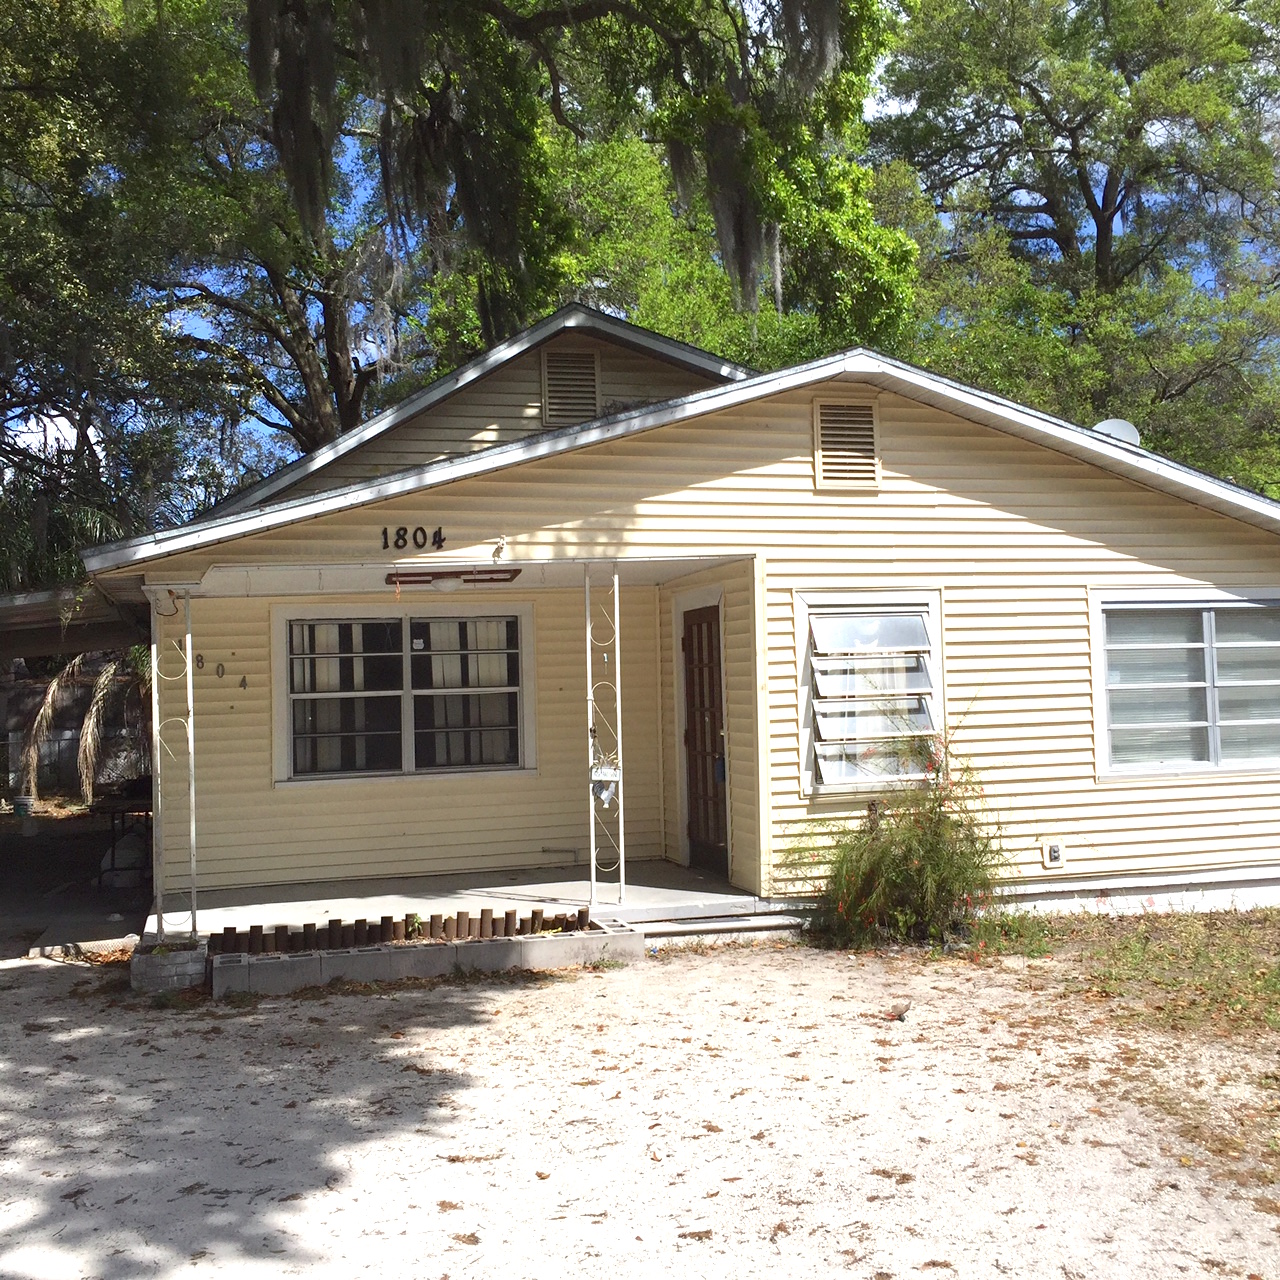 1**4 E Idlewild Ave,Florida,33610,3 Bedrooms Bedrooms,2 BathroomsBathrooms,Single Family,E Idlewild Ave,1029